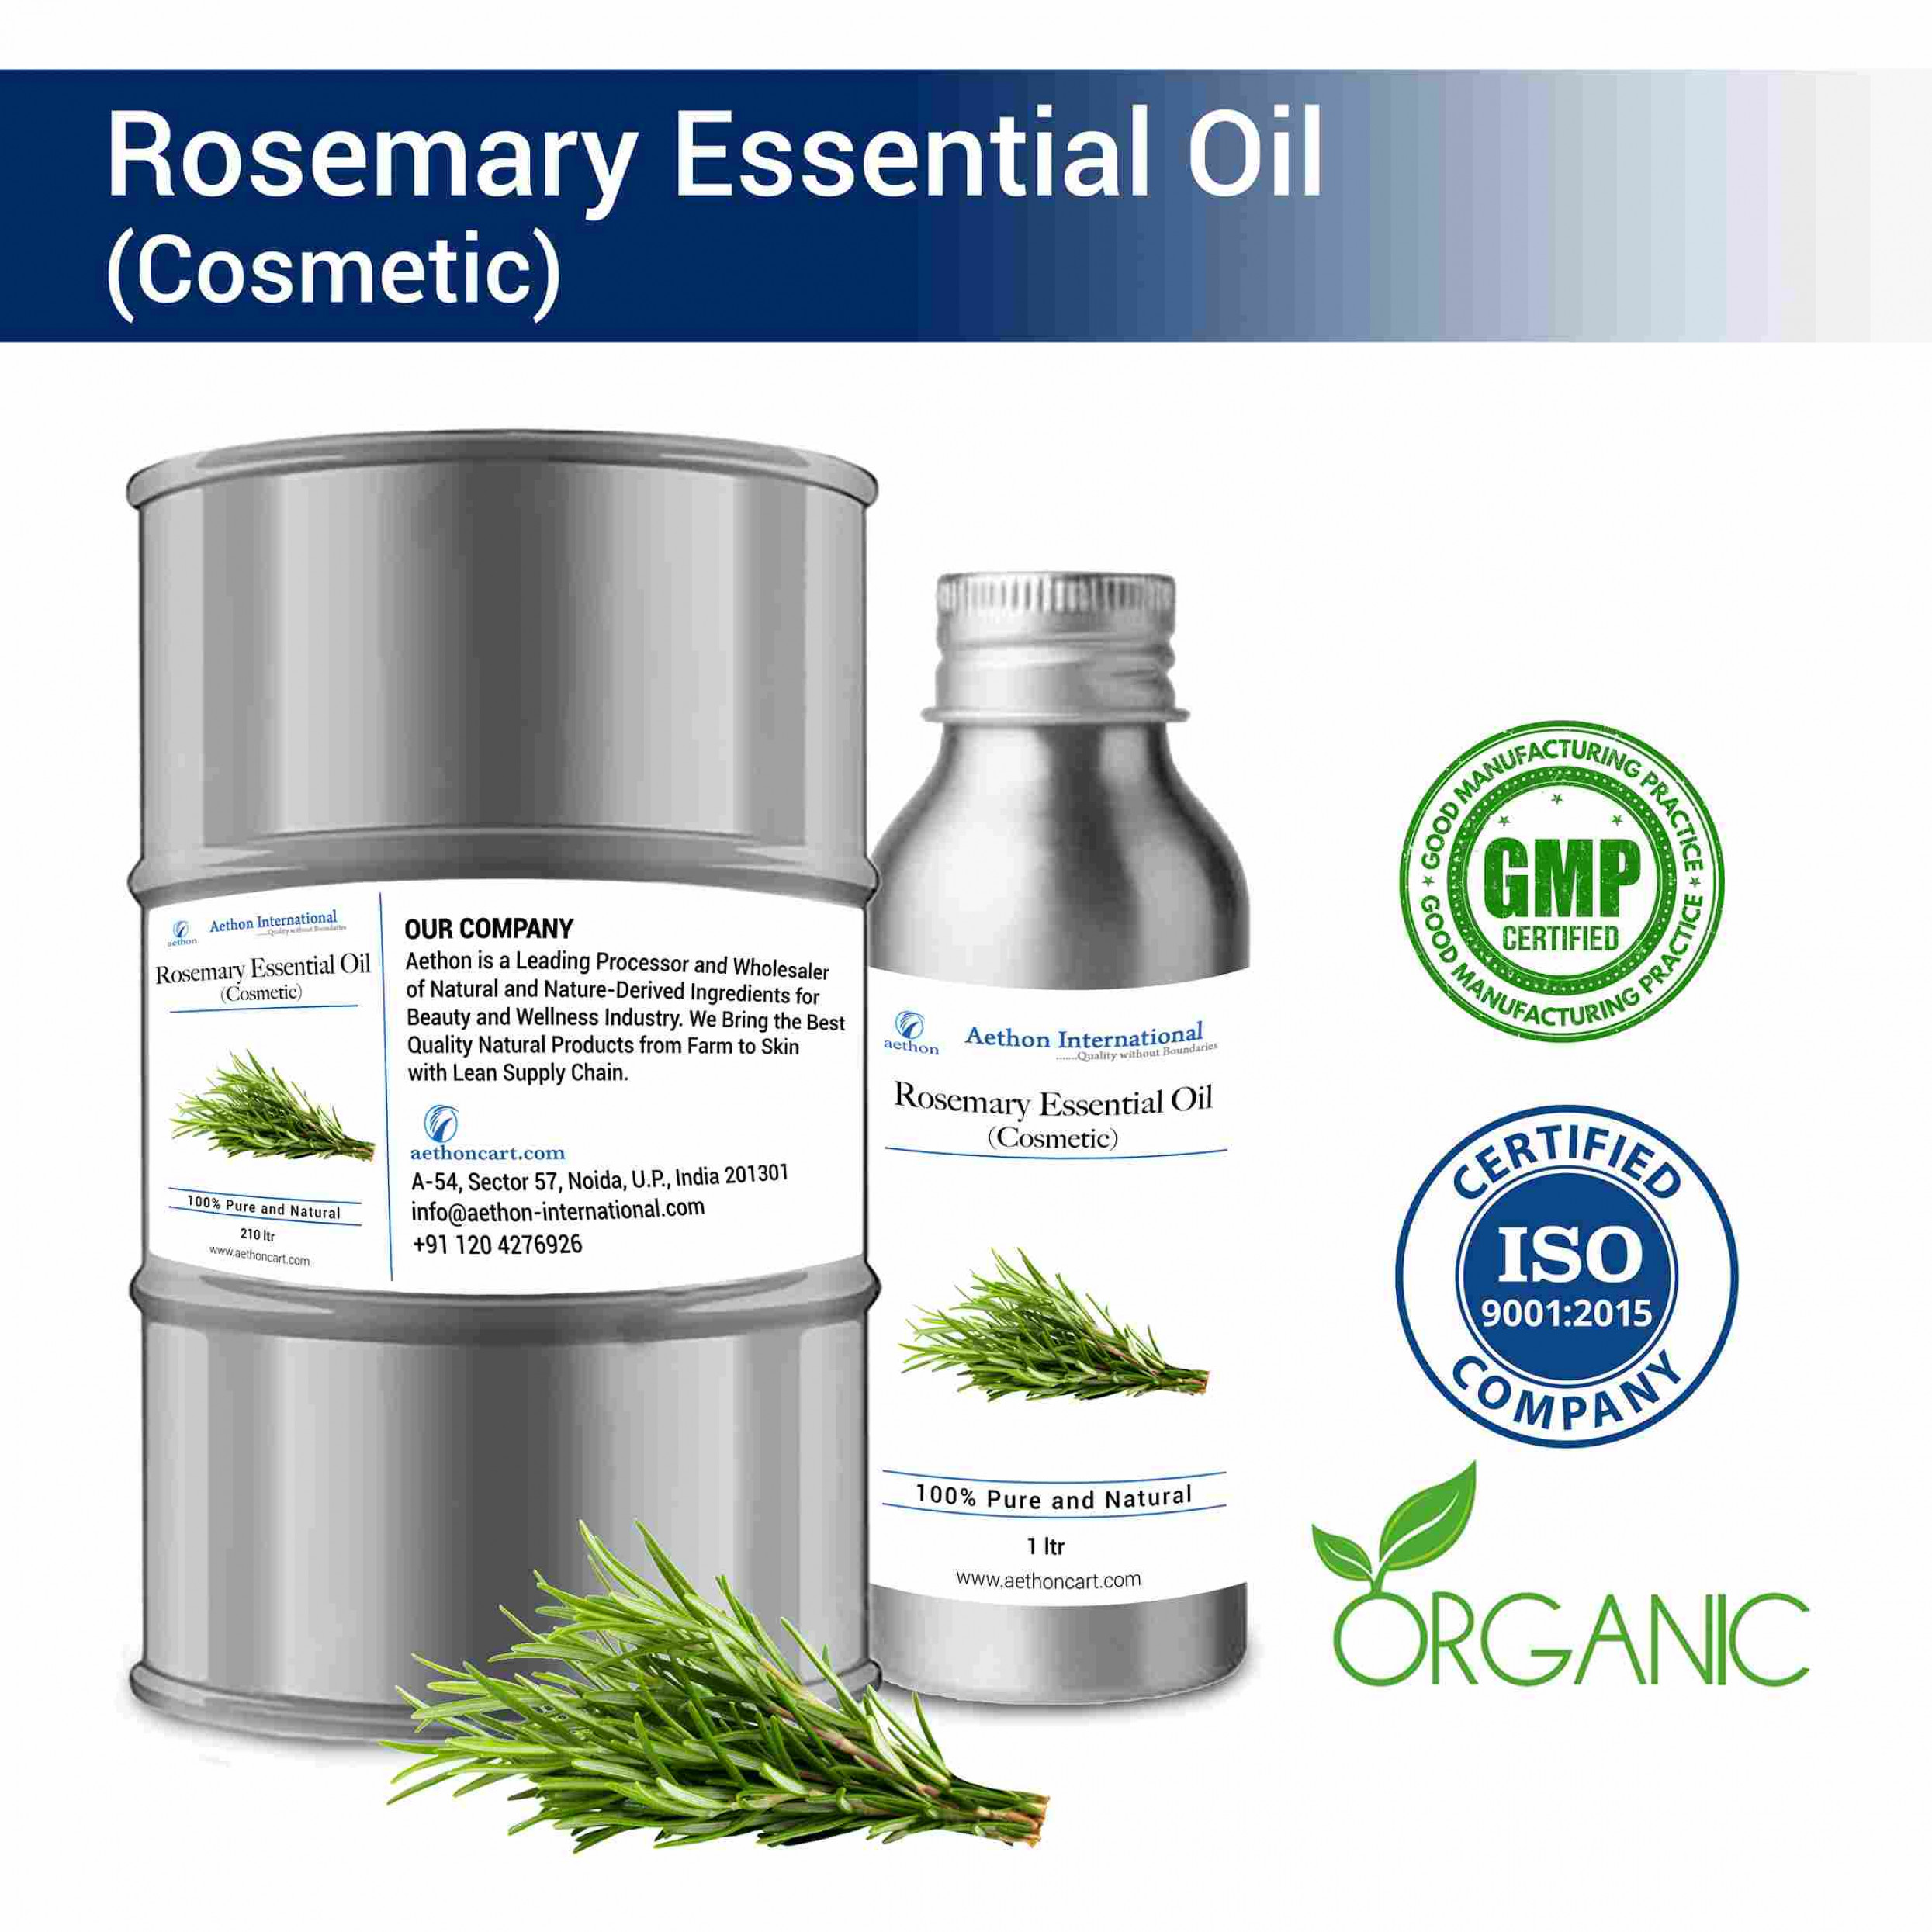 Rosemary Essential Oil (Cosmetic)